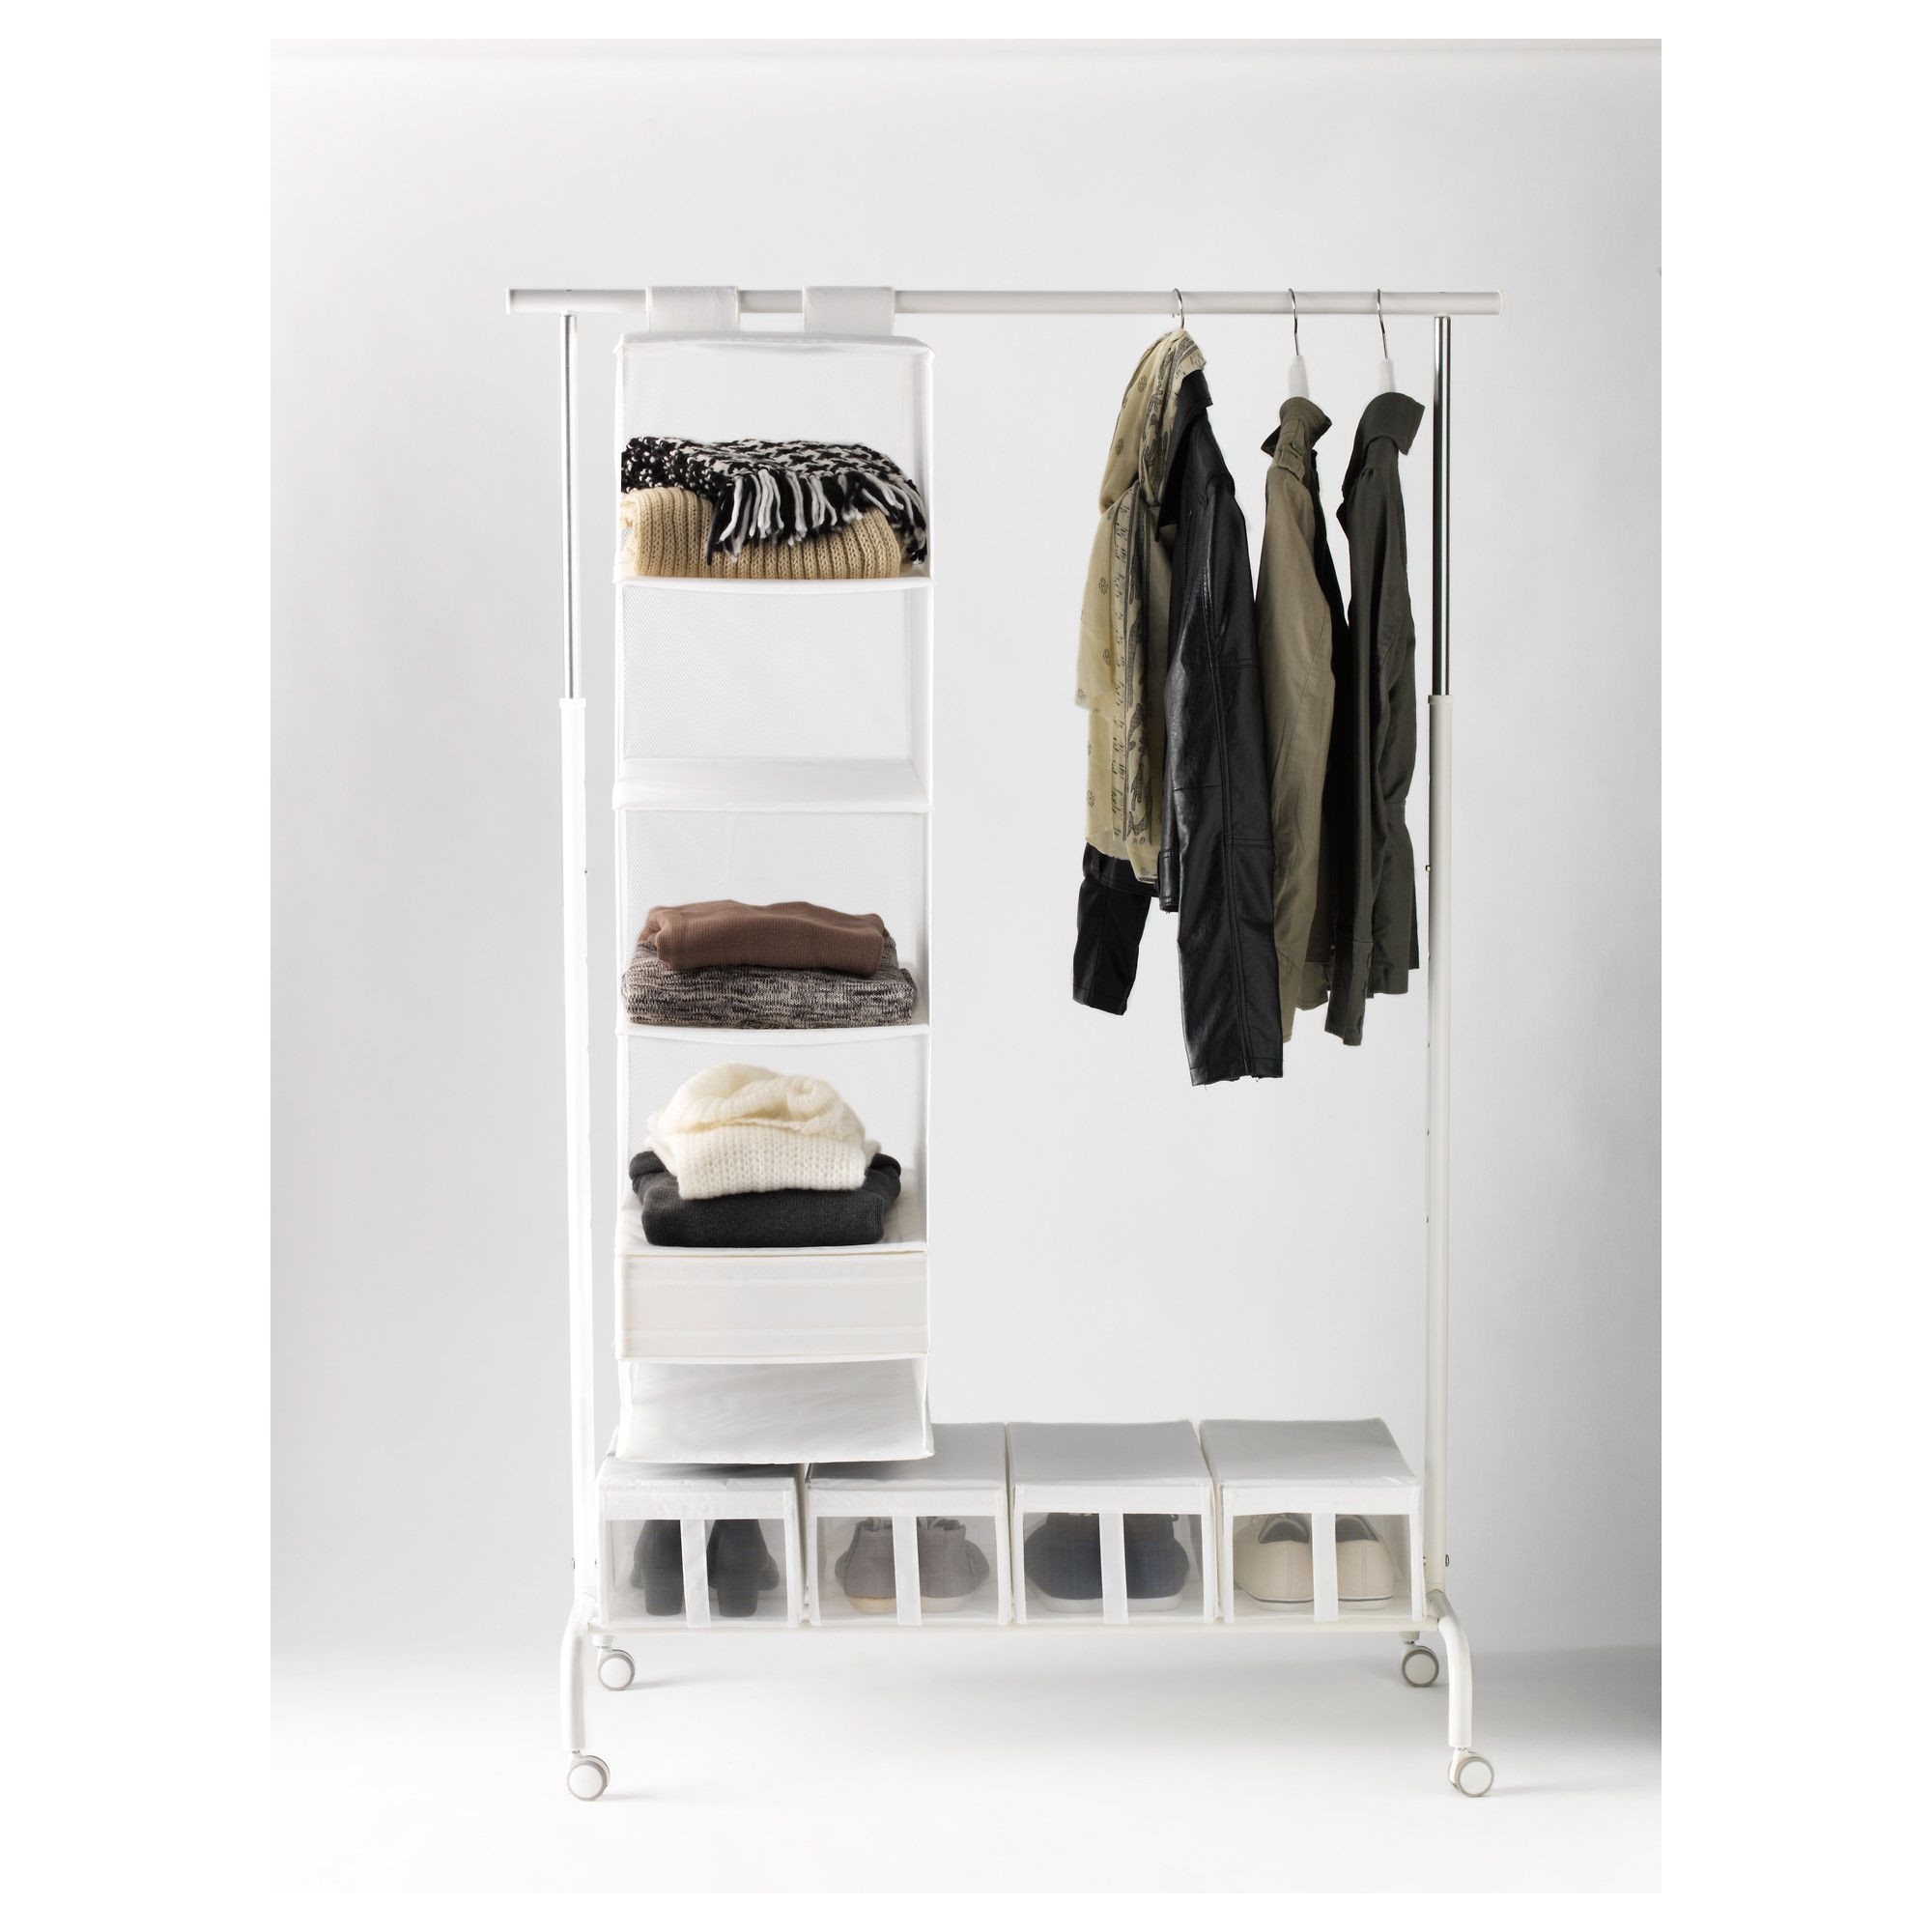 turbo clothes rack in outdoor black 0419110 pe576087 s5y wardrobe ikea ikea turbo suitable for both indoor and use i 0d